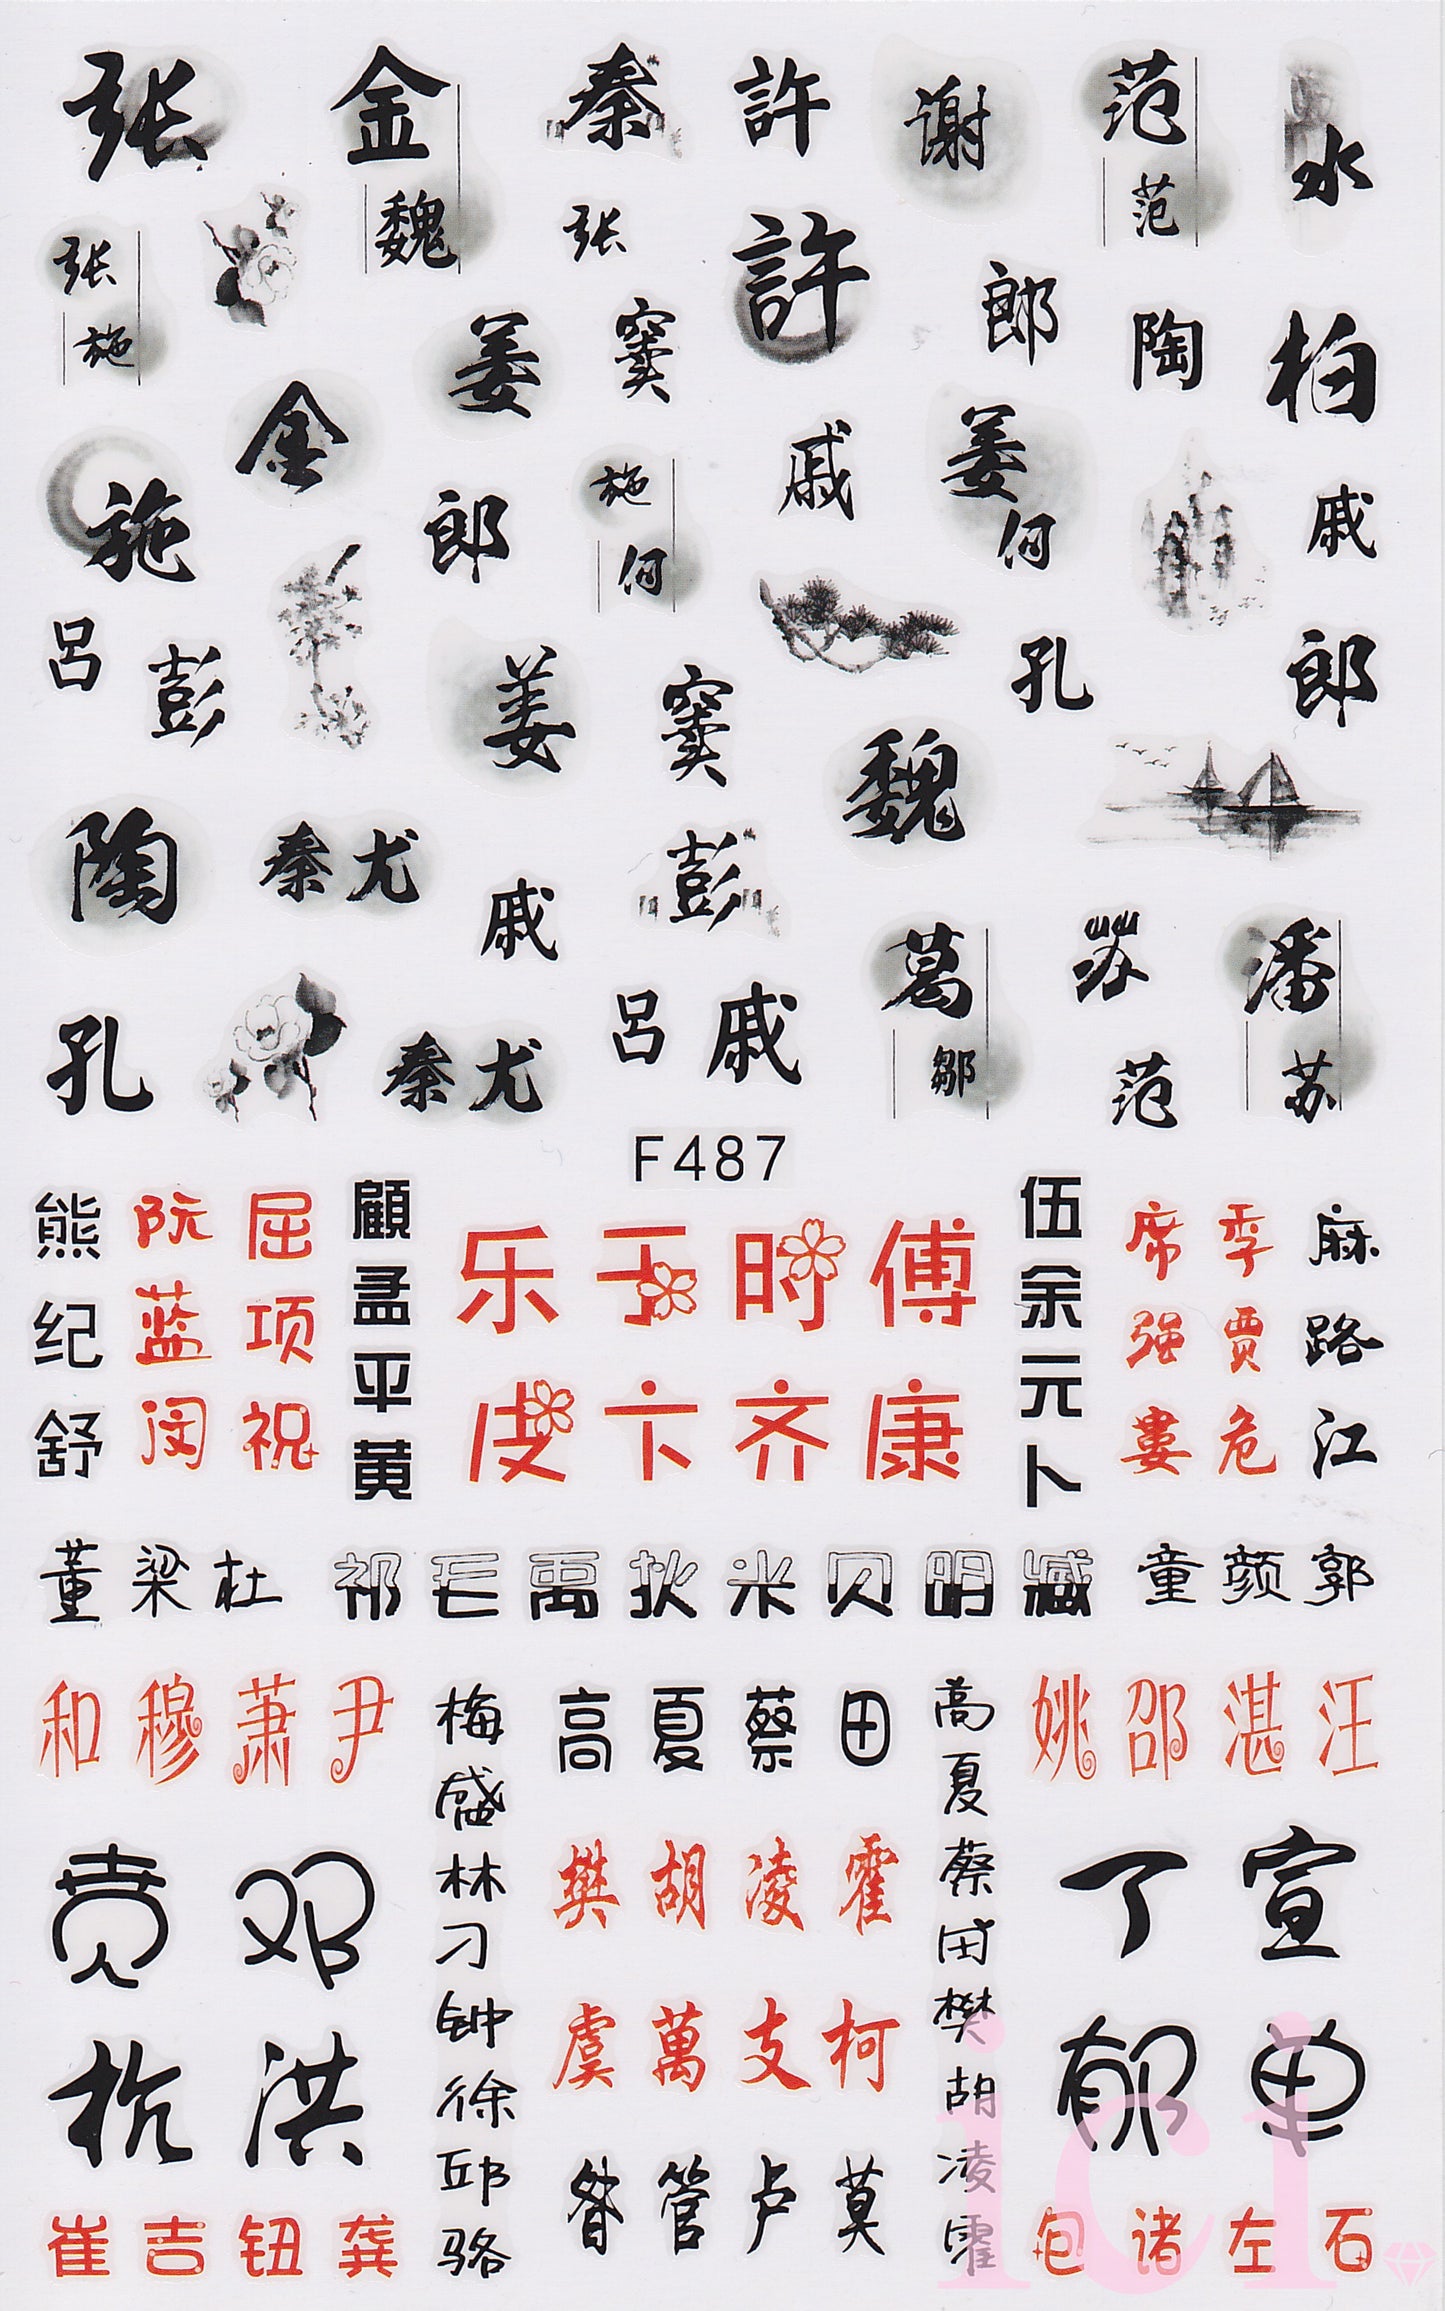 Chinese Calligraphy Words